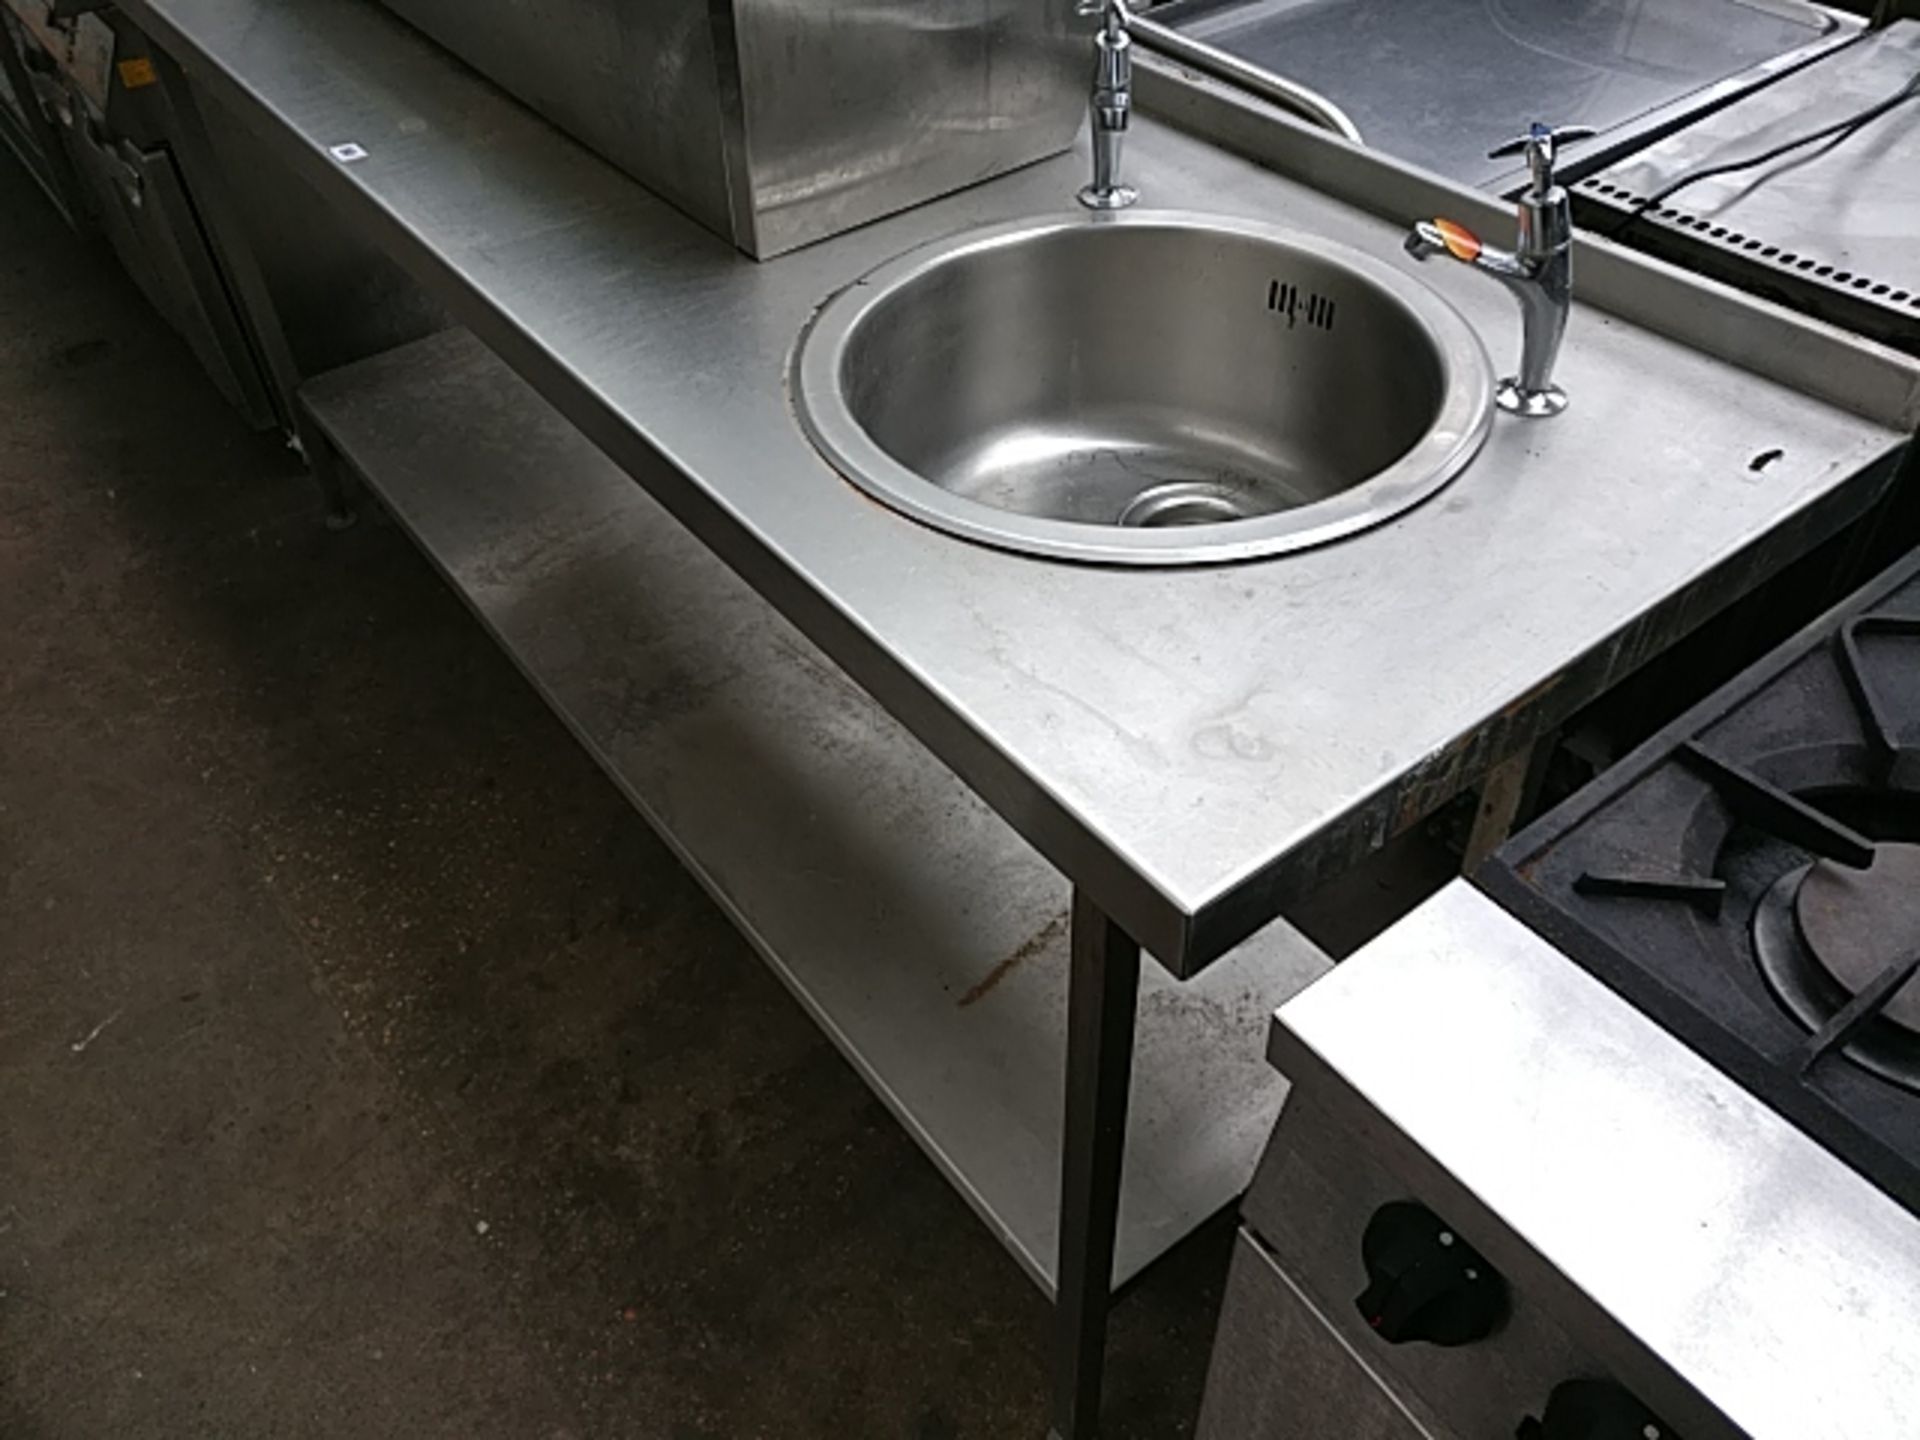 210cm stainless steel prep table with hand basin & tap set, shelves under - Image 2 of 2